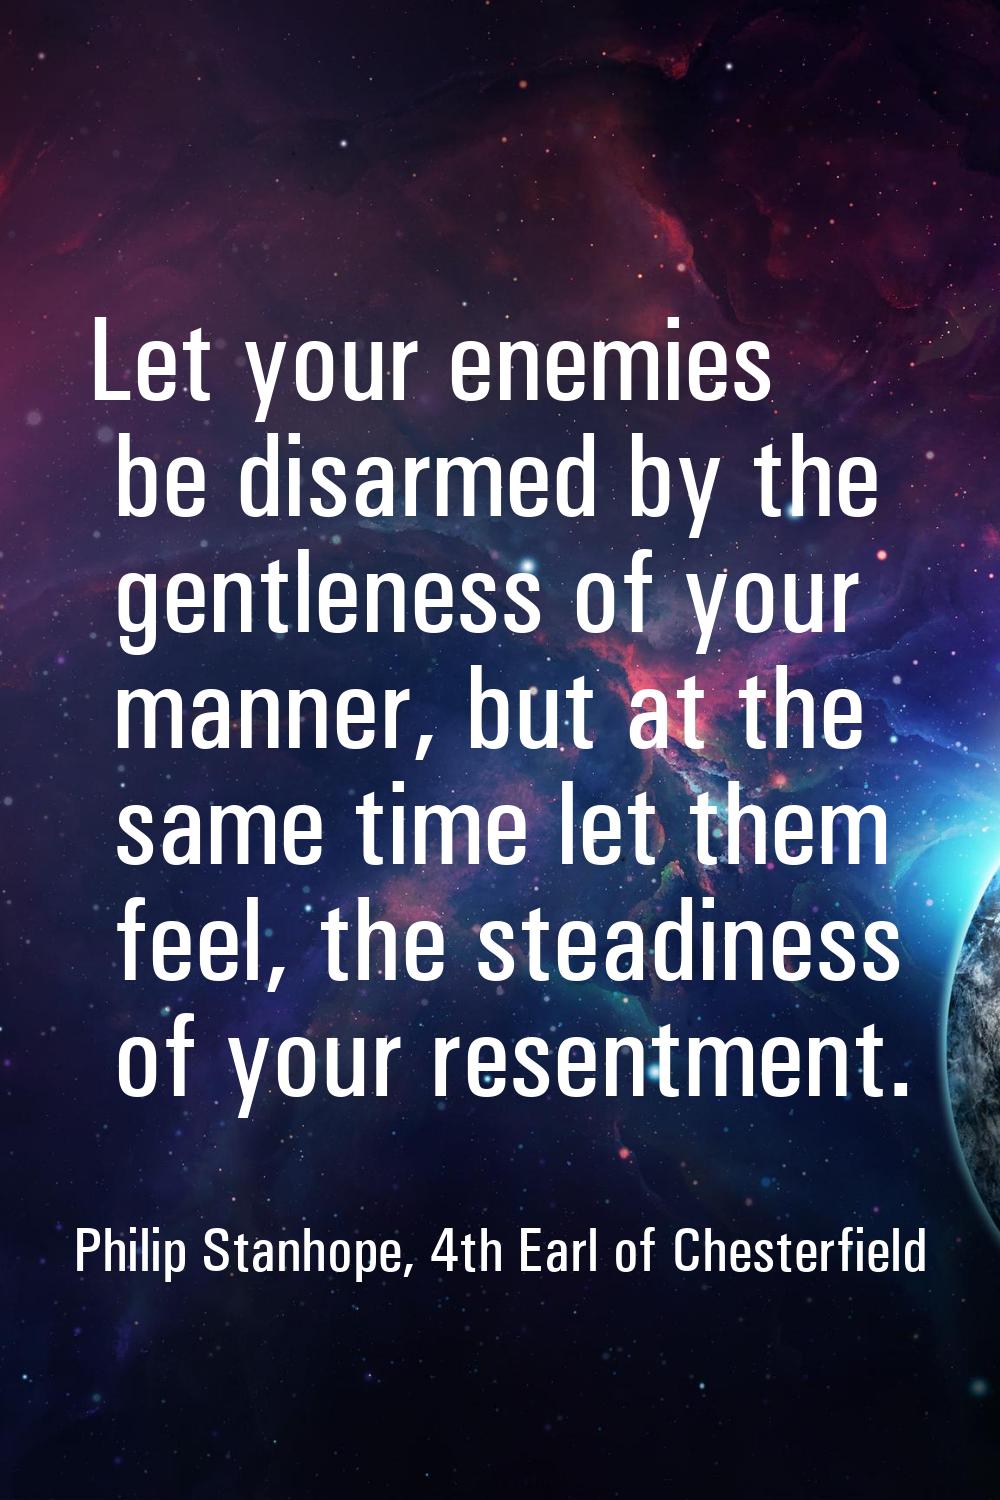 Let your enemies be disarmed by the gentleness of your manner, but at the same time let them feel, 